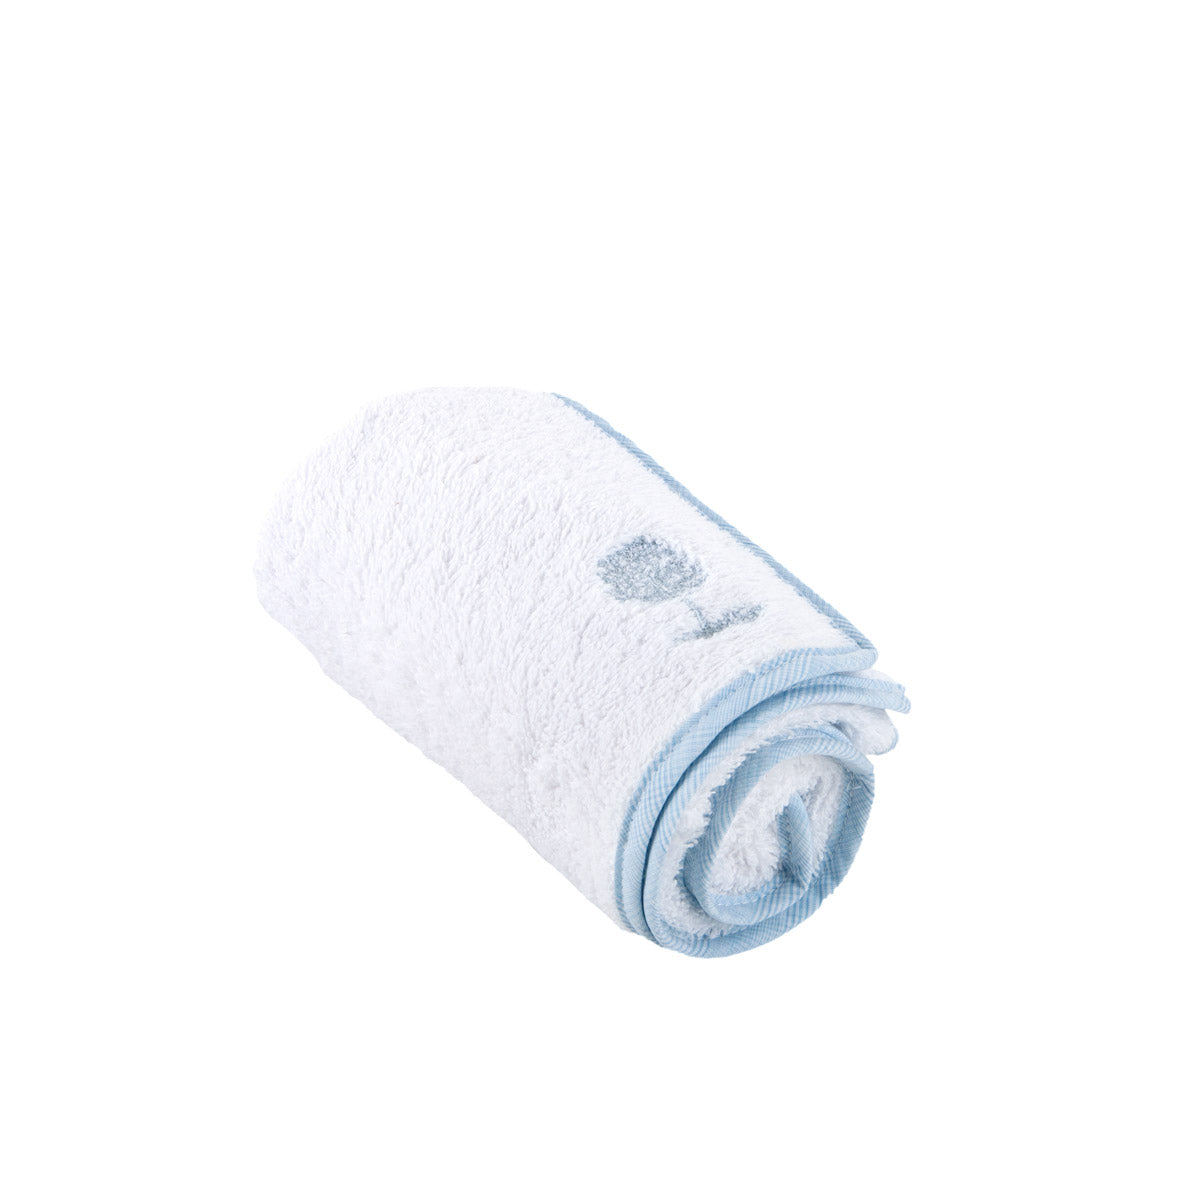 Theophile & Patachou Towel for Changing Mat - Sweet Blue / White